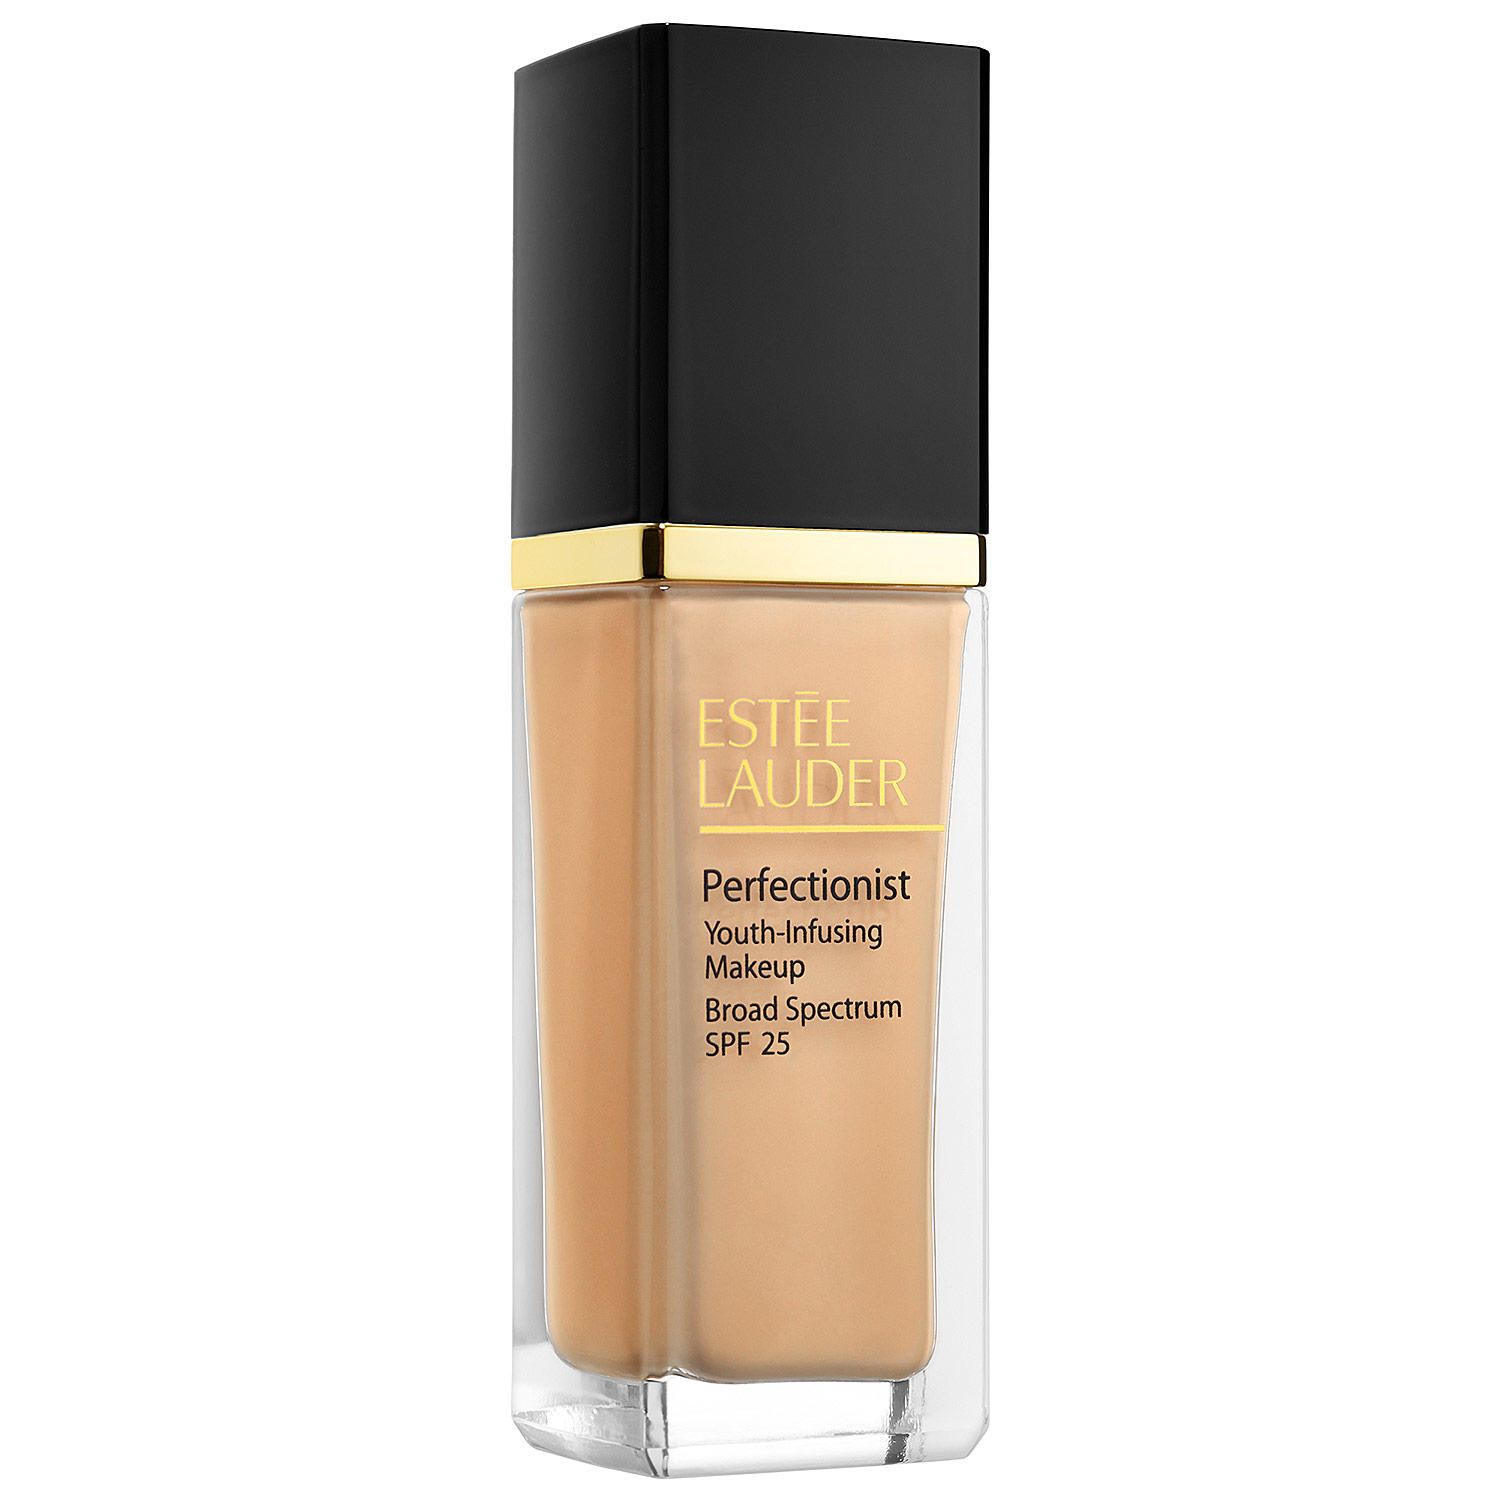 Estee Lauder Perfectionist Youth-Infusing Makeup Dawn 2W1